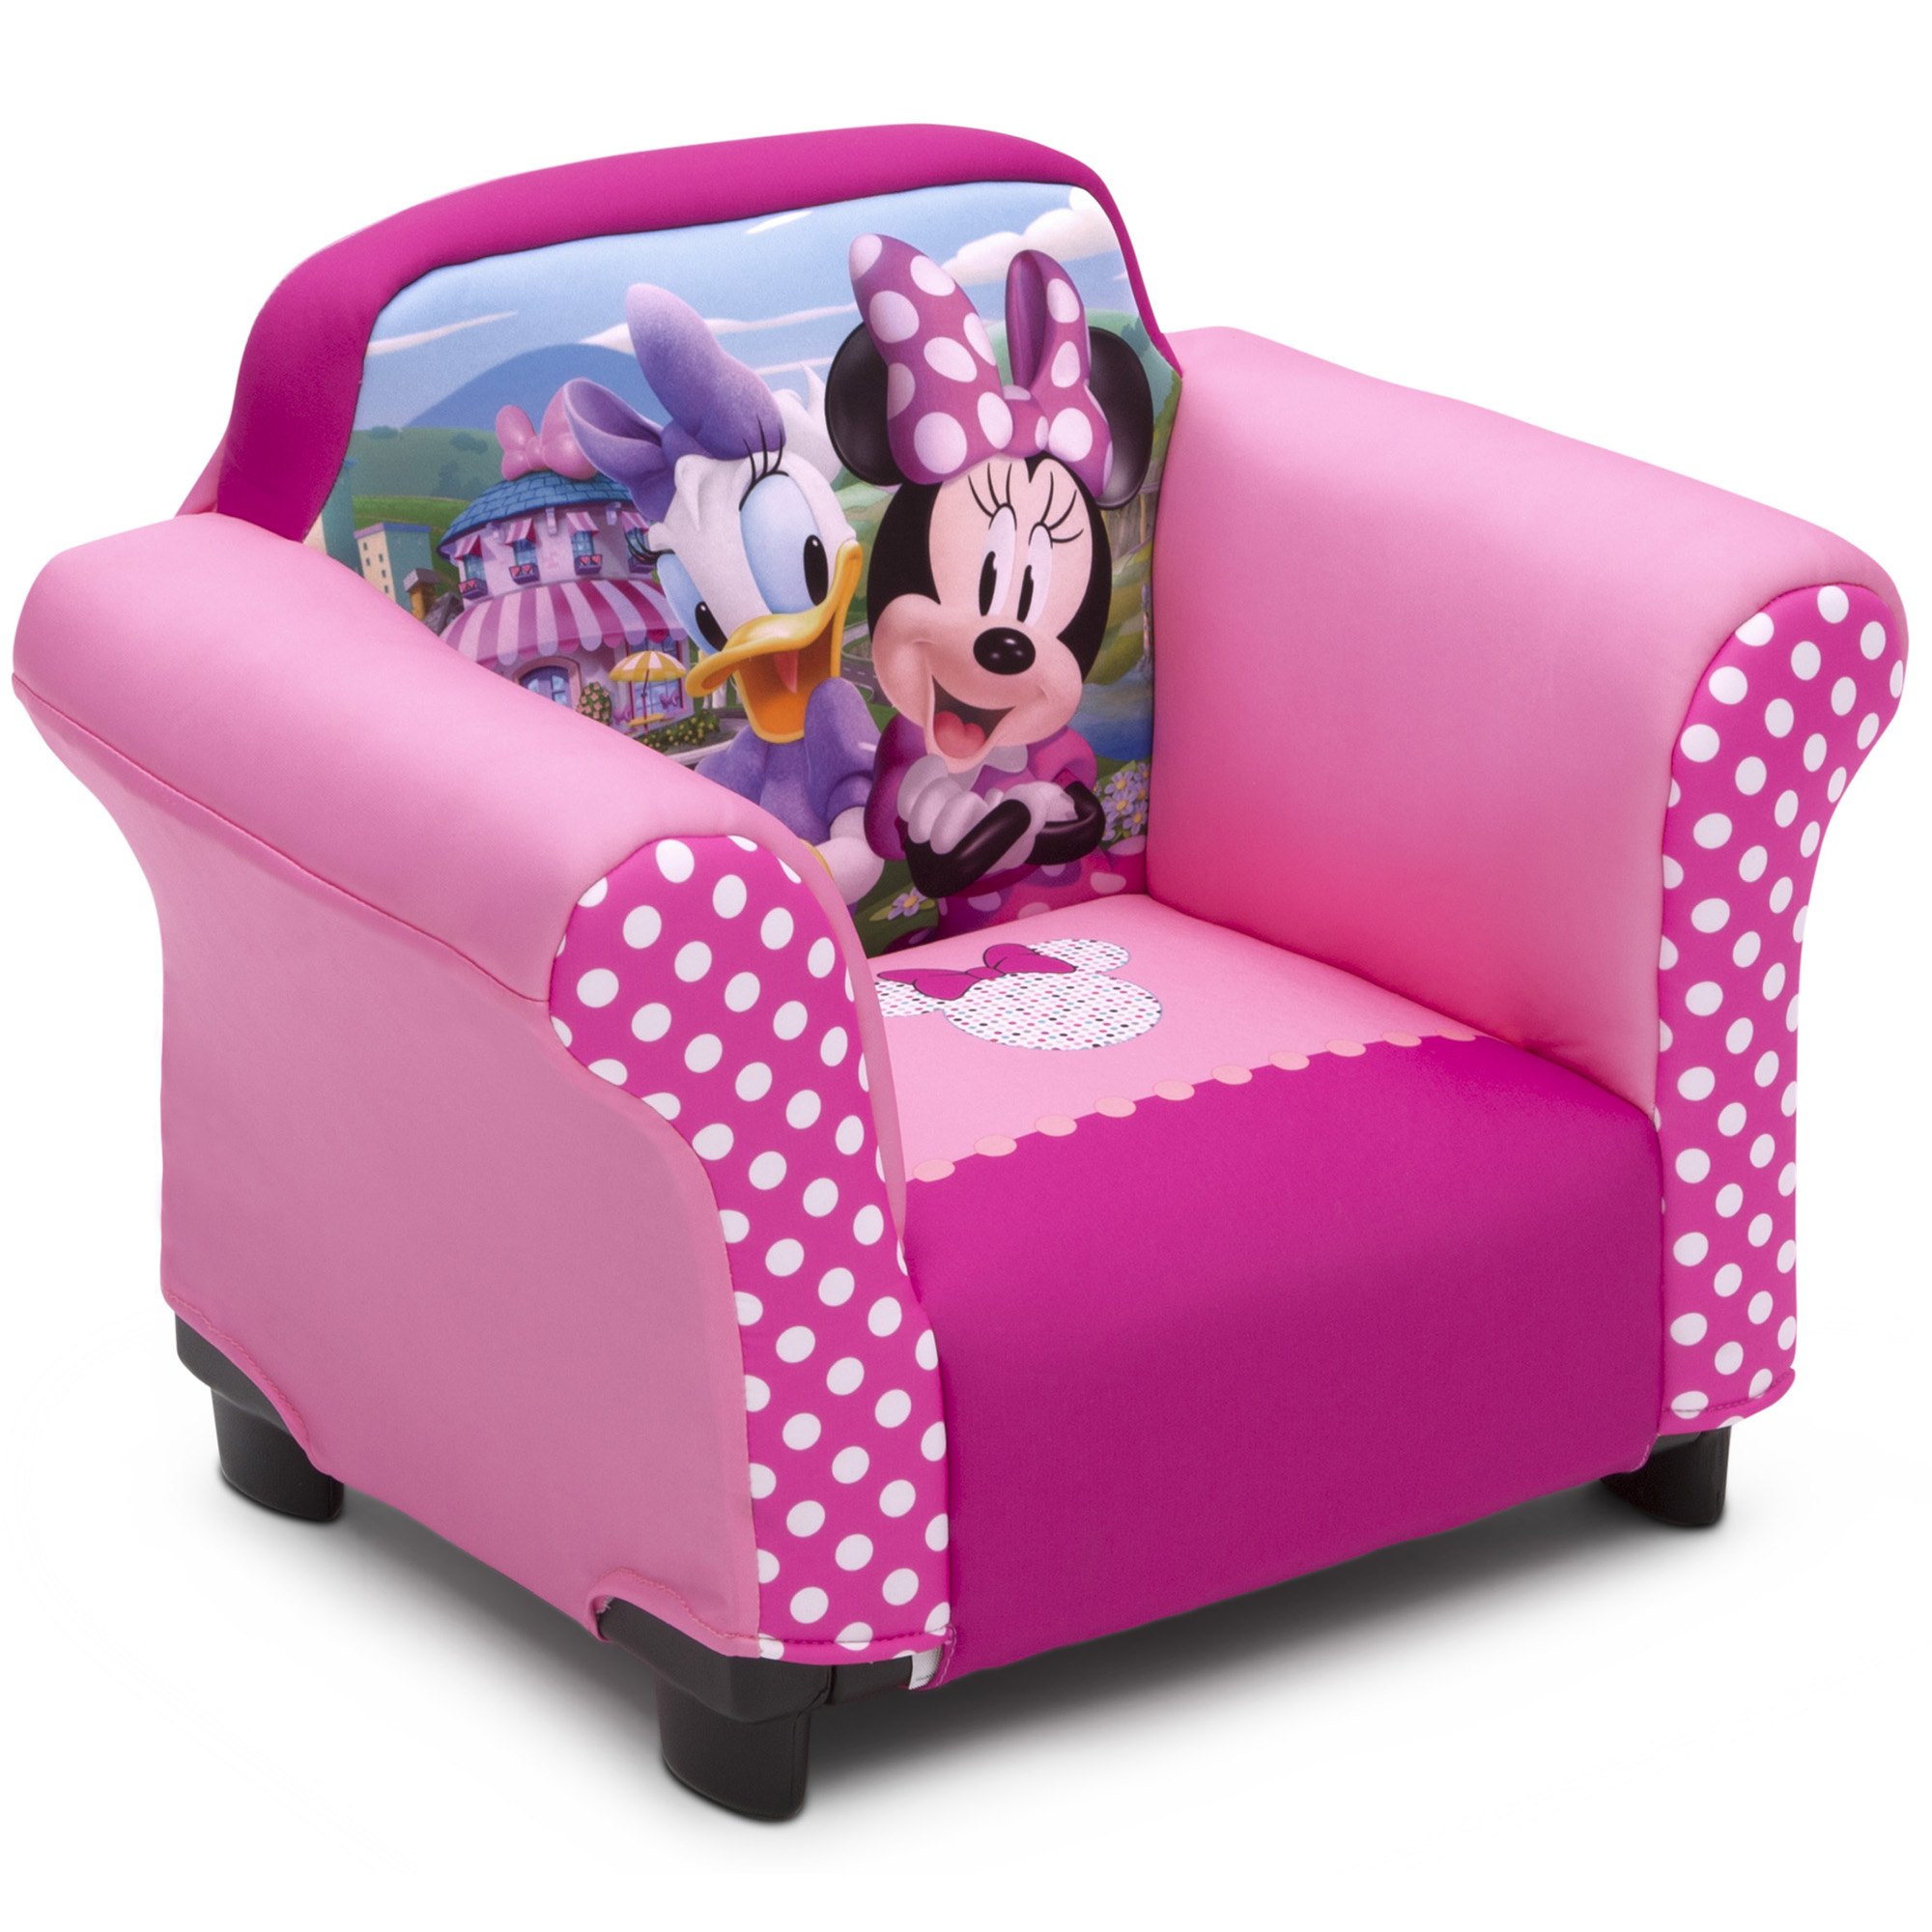 Delta Children Disney Minnie Mouse Kids Upholstered Chair with Sculpted Plastic Frame - image 3 of 6